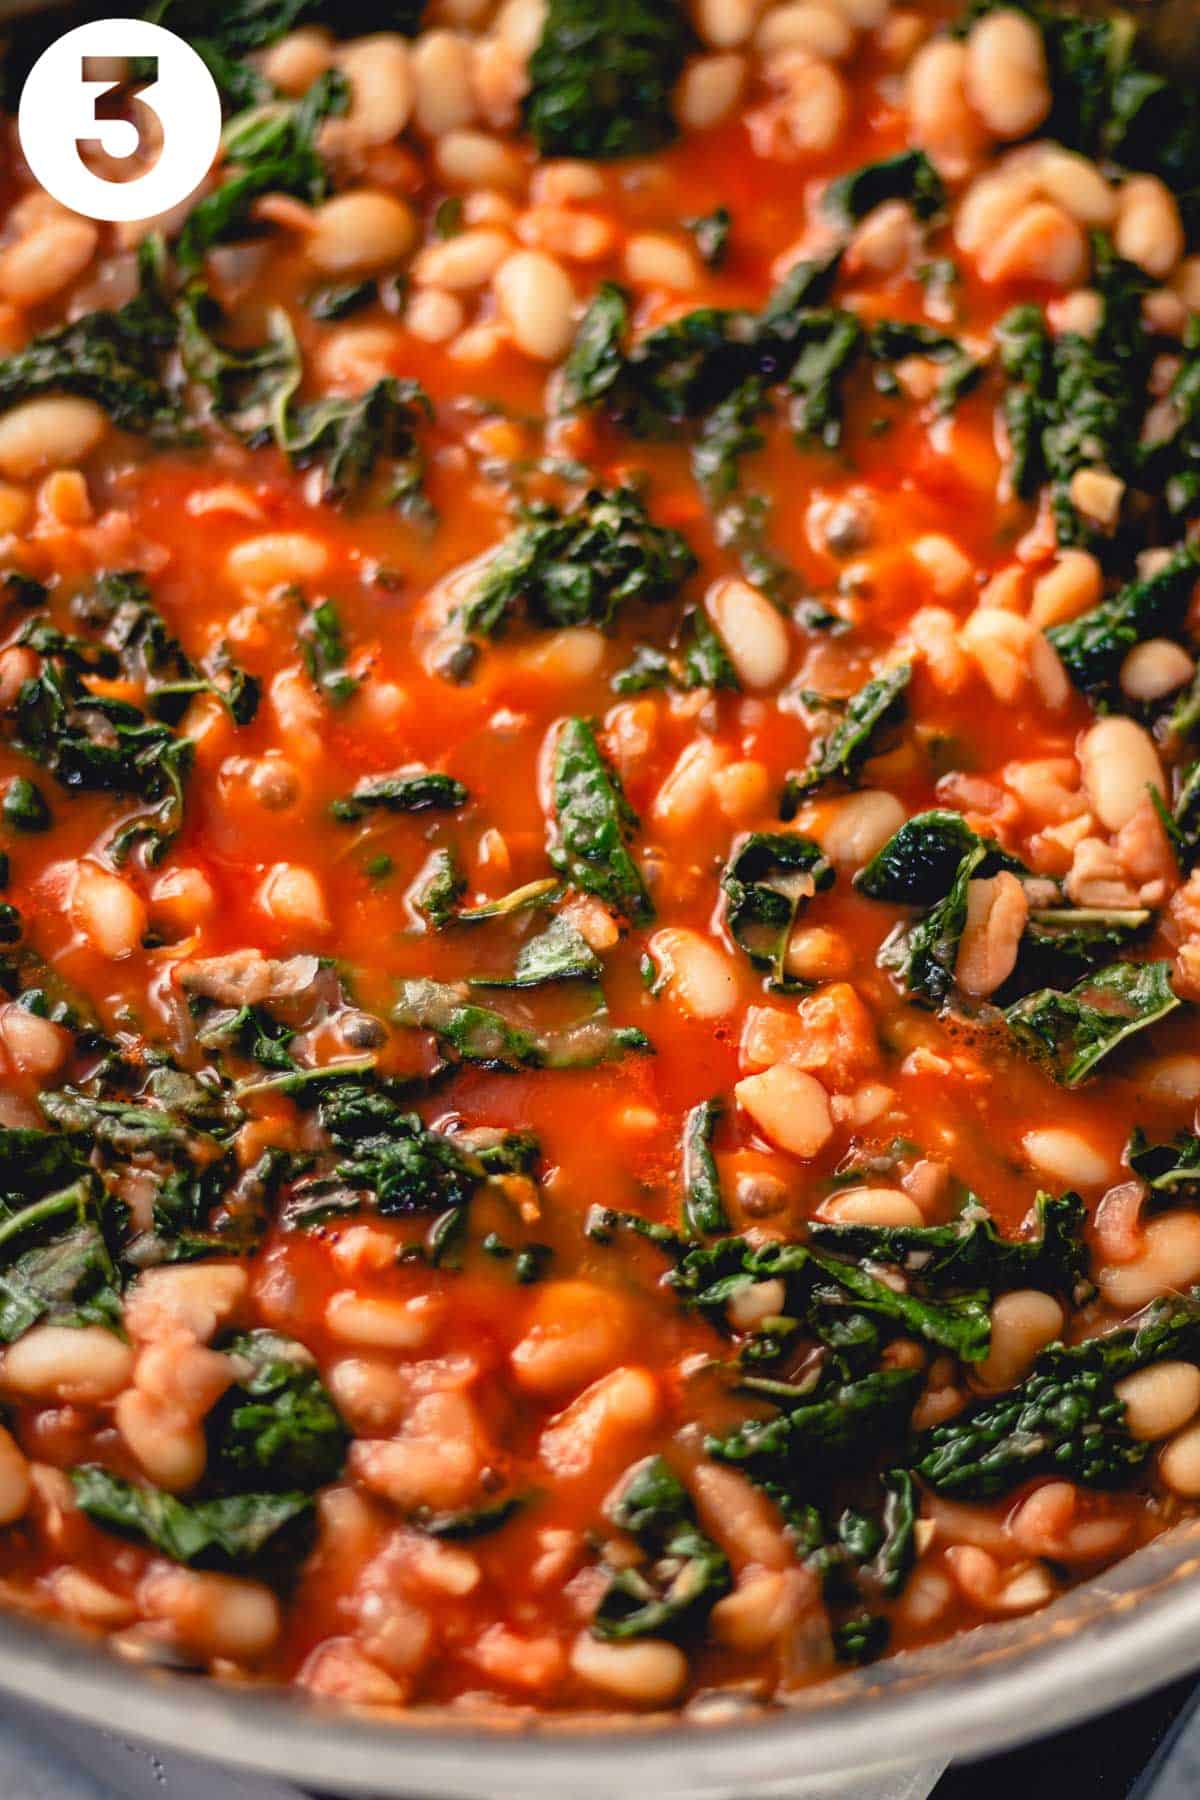 White beans and kale simmering in a tomato-based broth. There is a number "3" in the upper left corner.